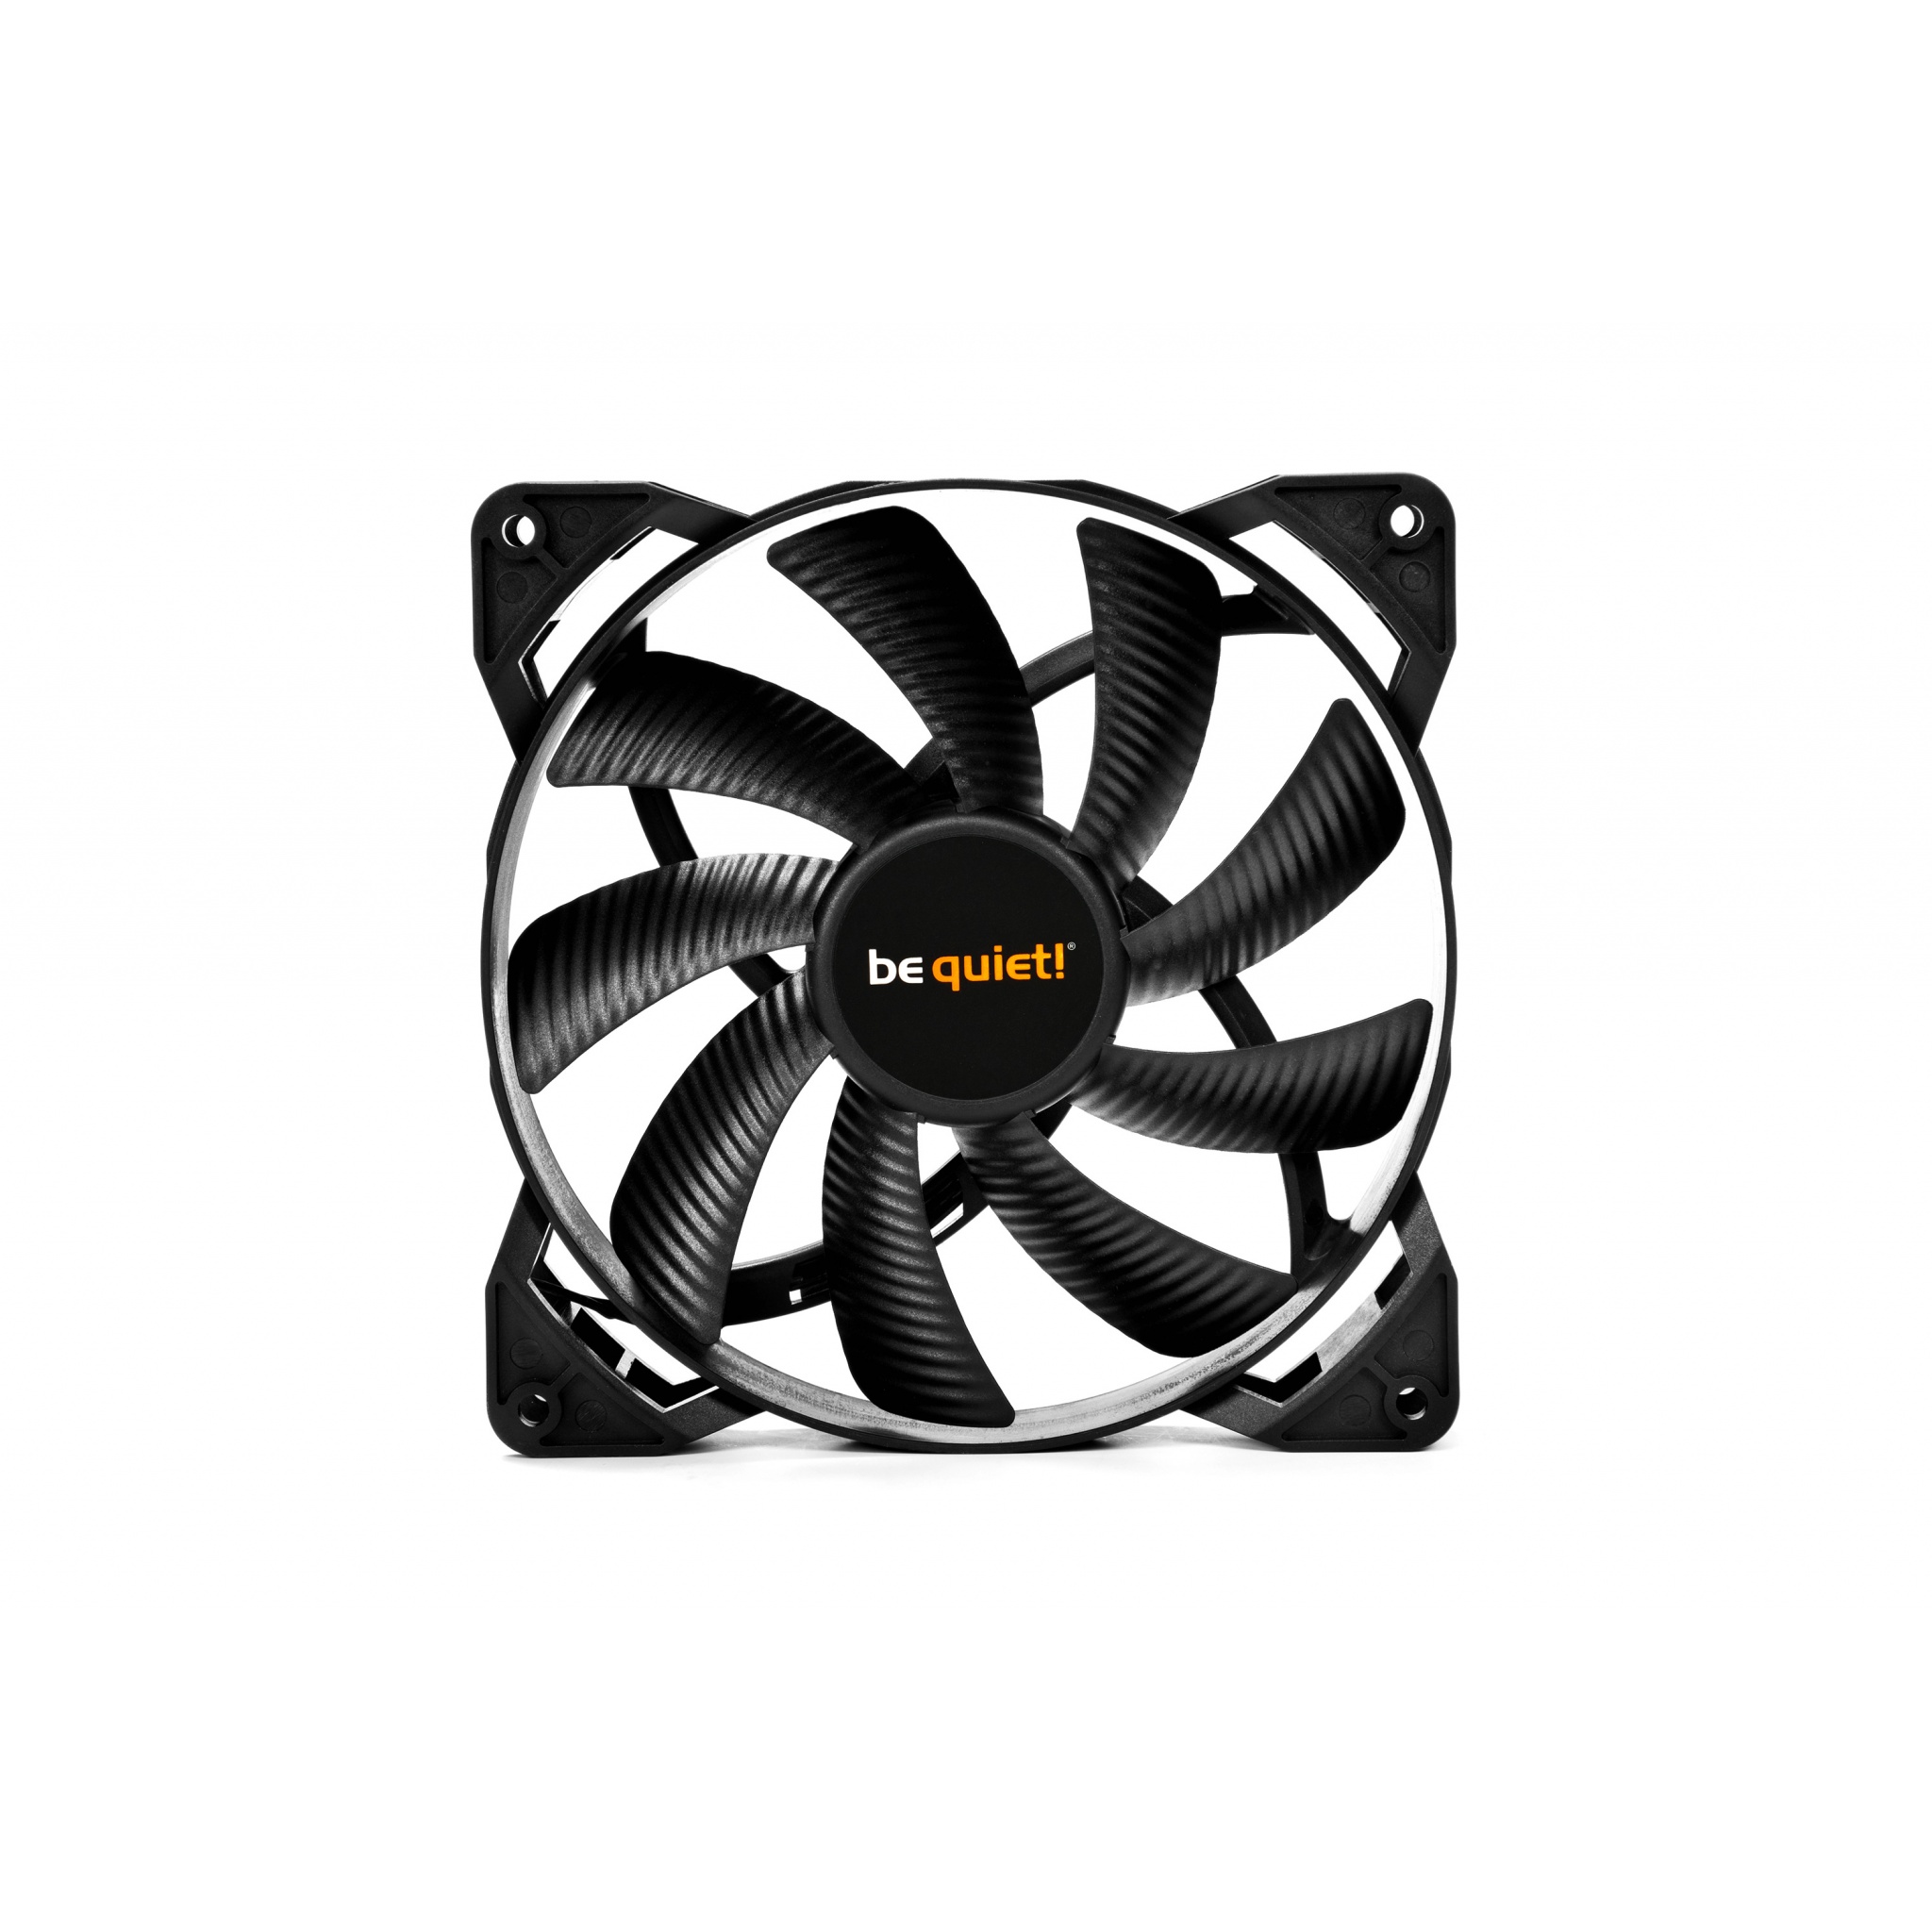 be quiet! Pure Wings 2 Case PWM 140mm Computer Fan